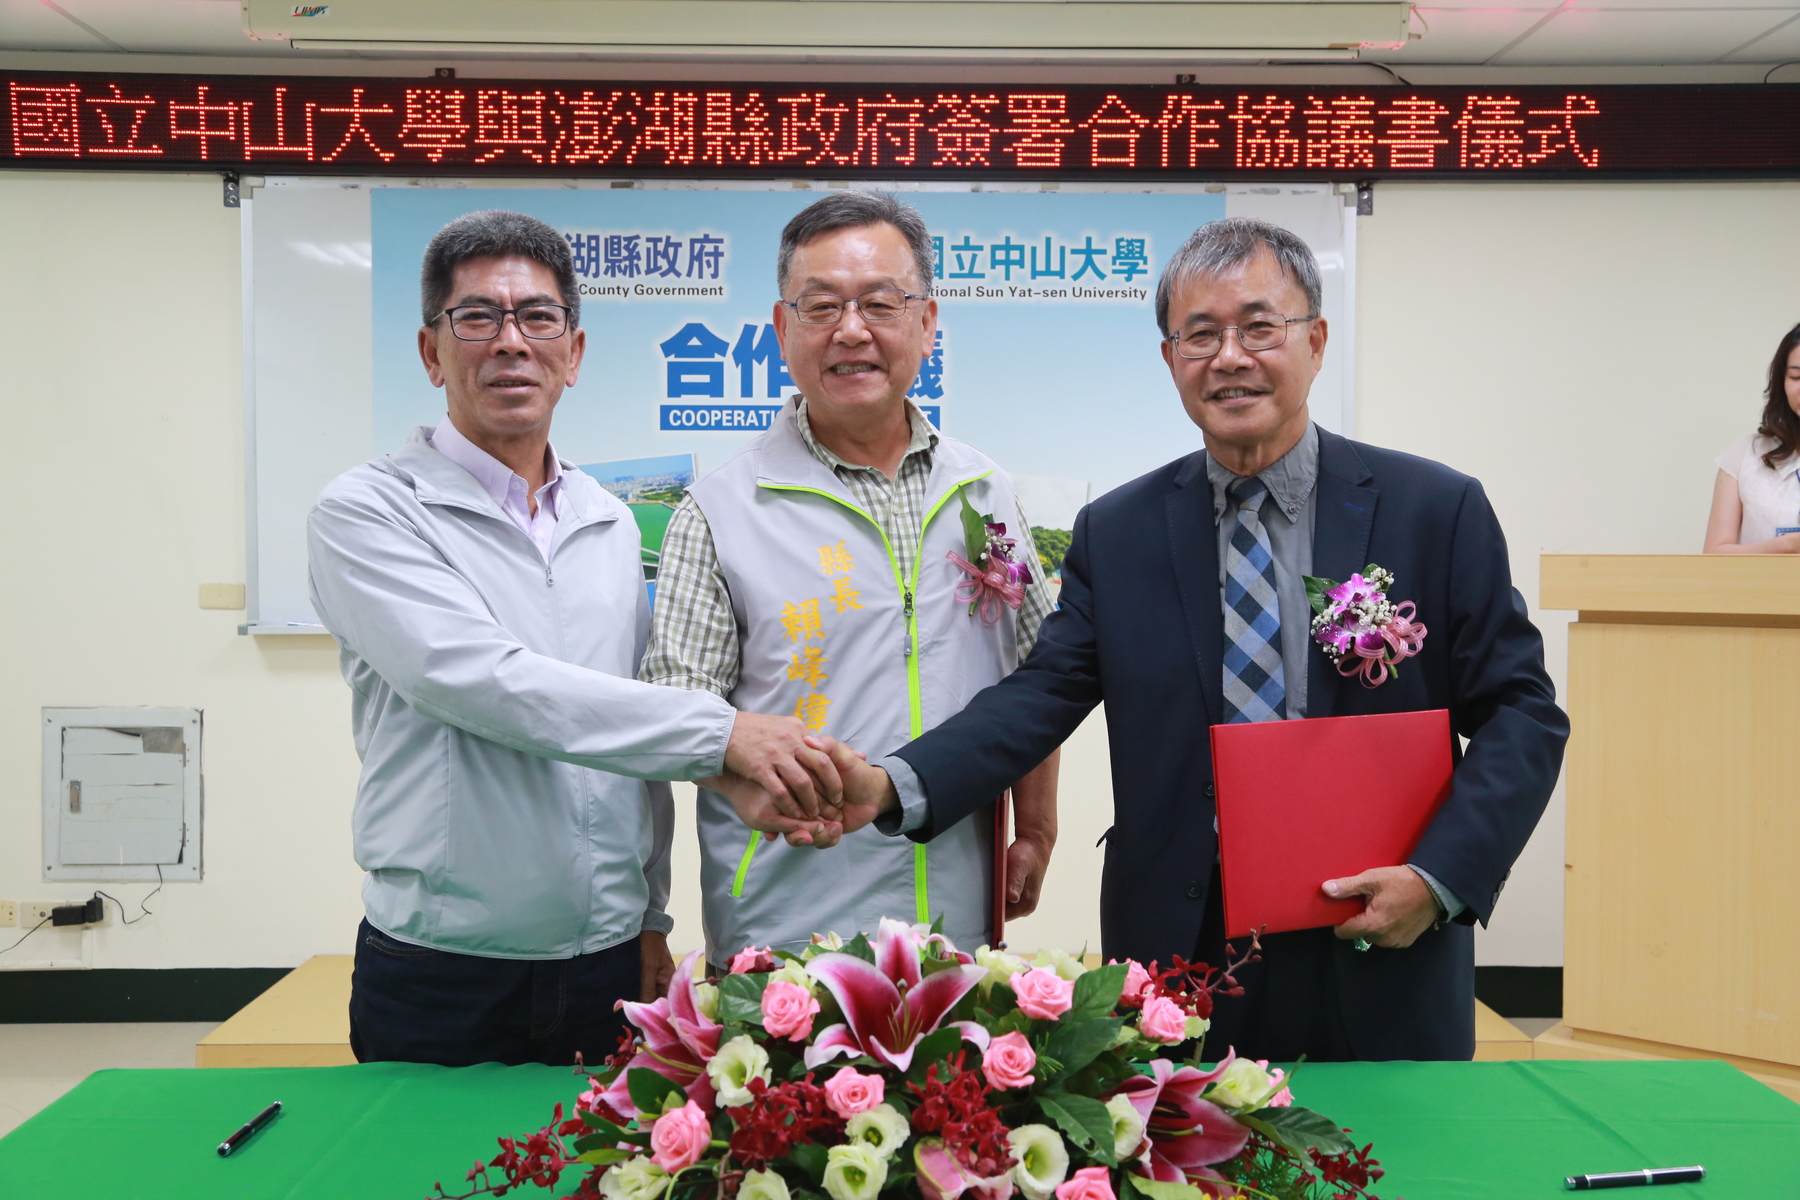 NSYSU and Penghu County Government will strive to cultivate and retain medical professionals in outer islands. With the Member of the Legislative Yuan Yao Yang as witness, NSYSU President Ying-Yao Cheng (right) signed an agreement on collaboration with Penghu County Mayor Feng-Wei Lai (center) to join hands and develop new medical technologies, improve the quality of rural healthcare, and provide assistance for rural healthcare professionals through industry-academia cooperation, academic exchange, and professionals’ training.